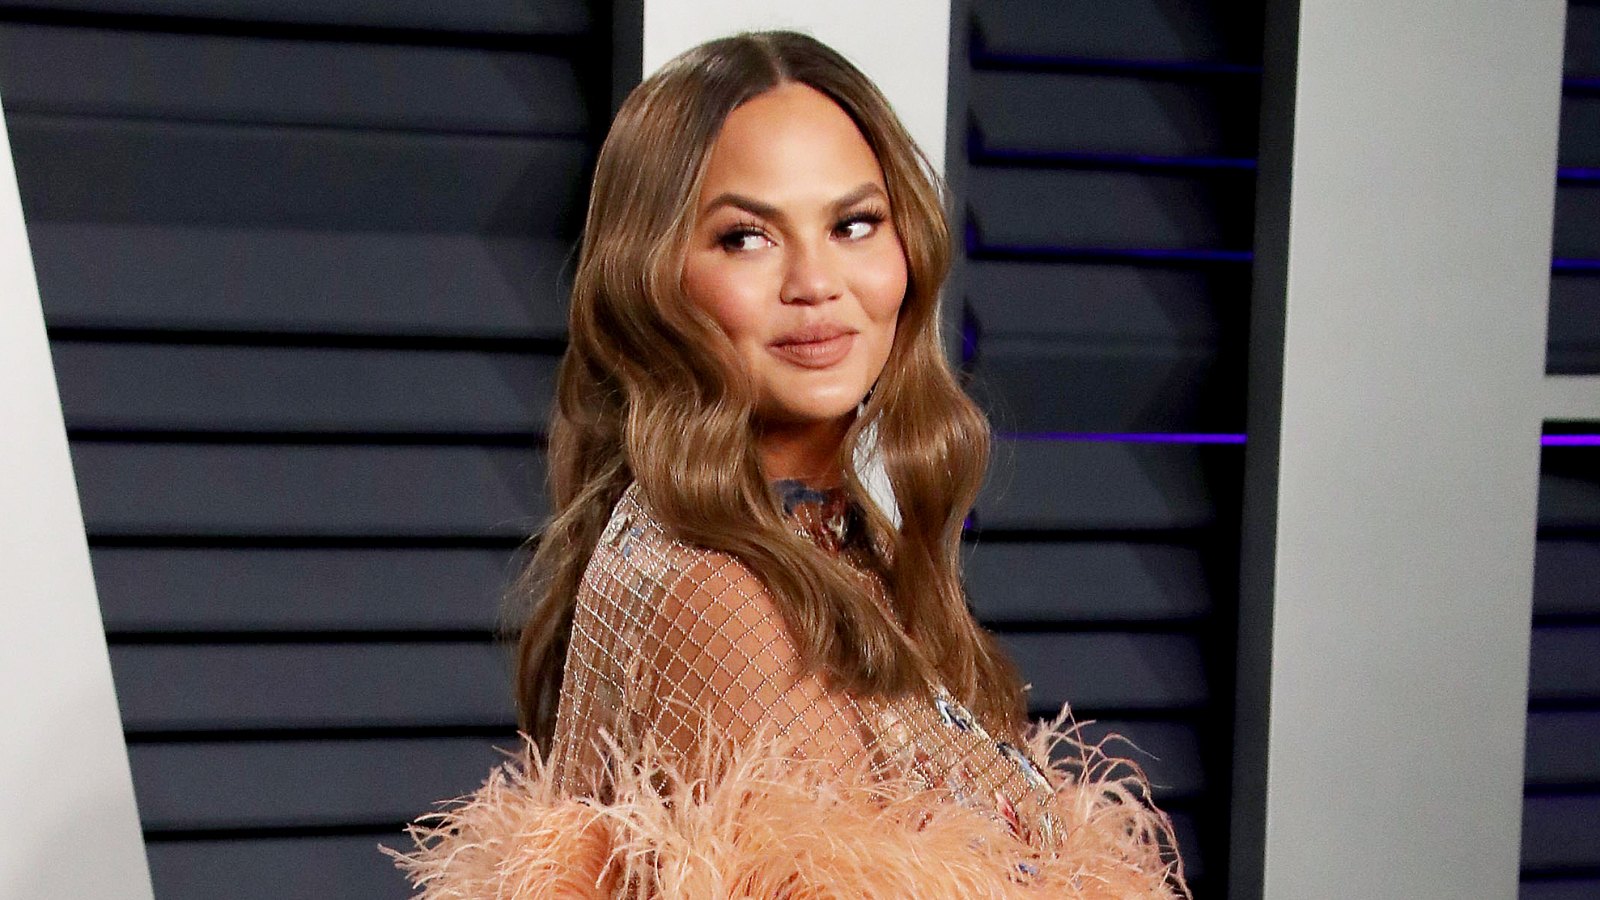 Chrissy Teigen Slams Claims She Dropped 50 Pounds Has Cancer